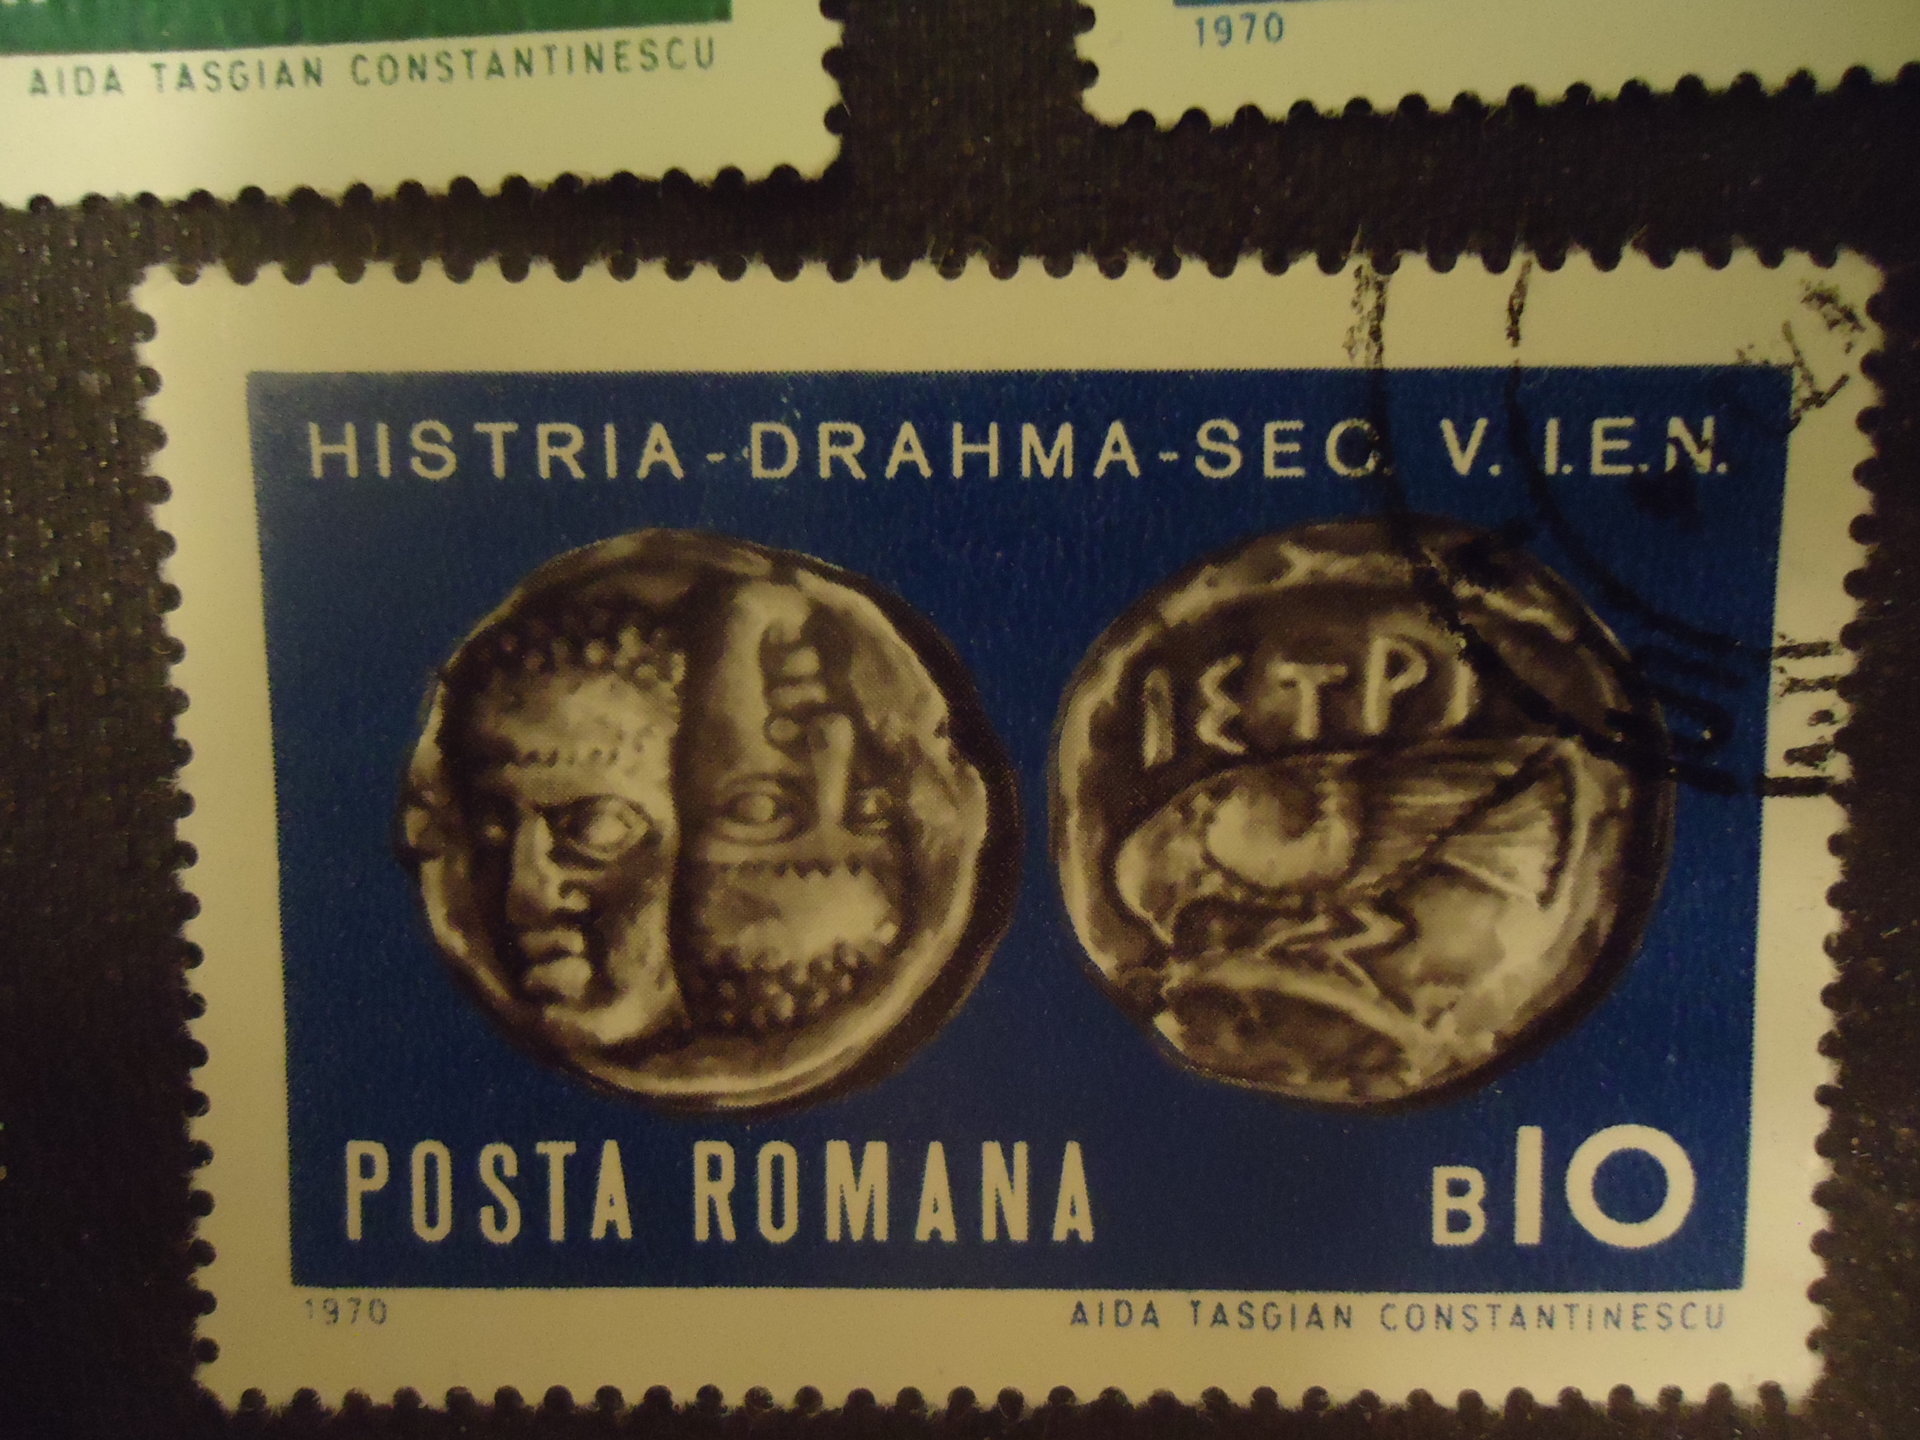 Ancient Coin Stamps Sep 2019 (5).JPG